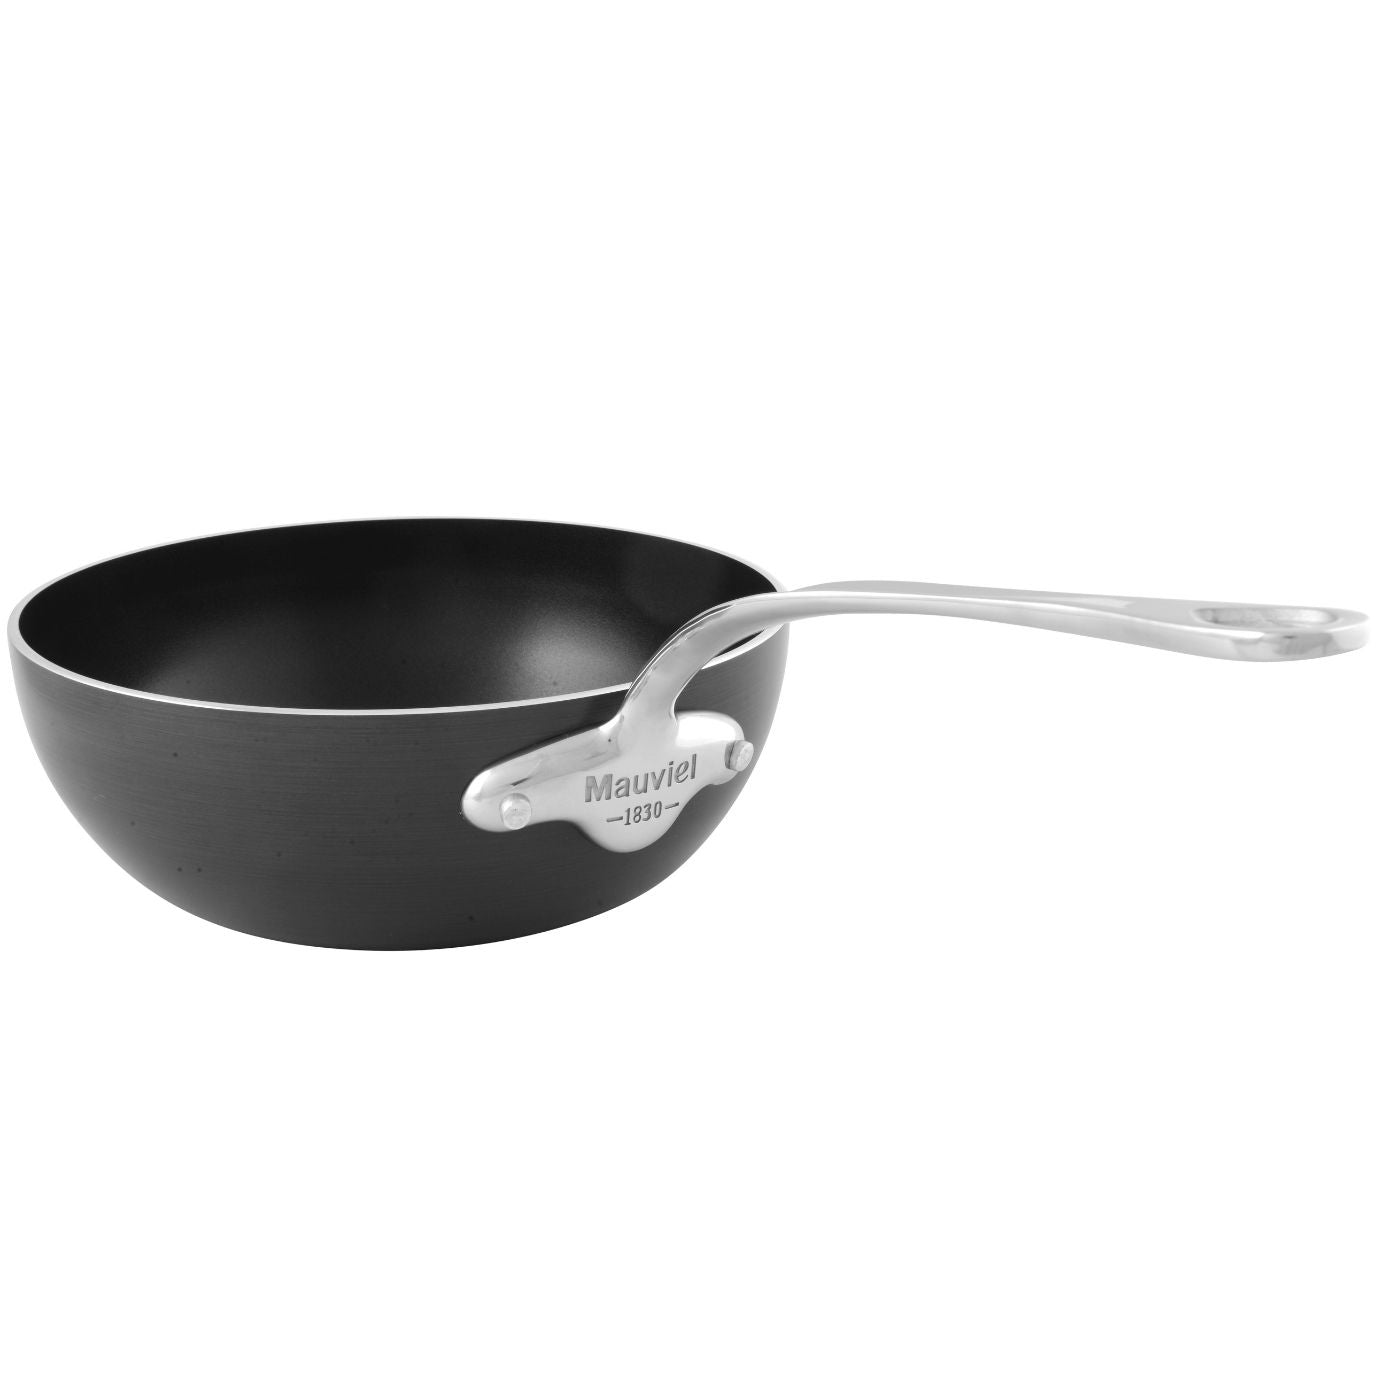 Mauviel M'Stone Non Stick Curved Saute Pan with Glass Lid - 20cm